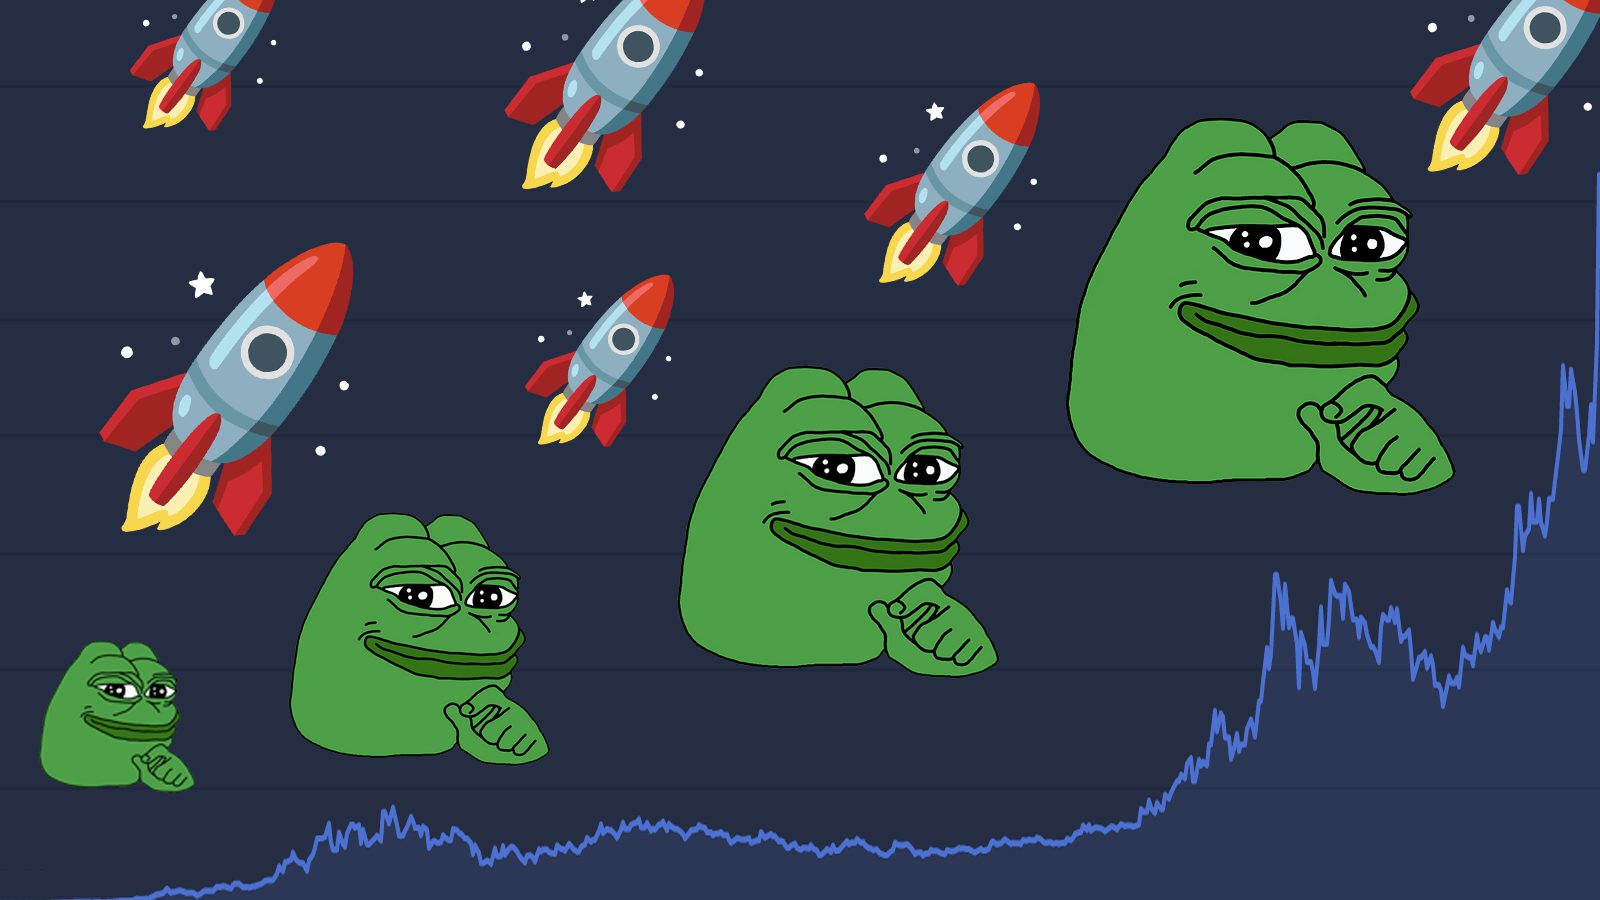 Pepe’s Price Forecasted To Surge 200%: Here’s When?